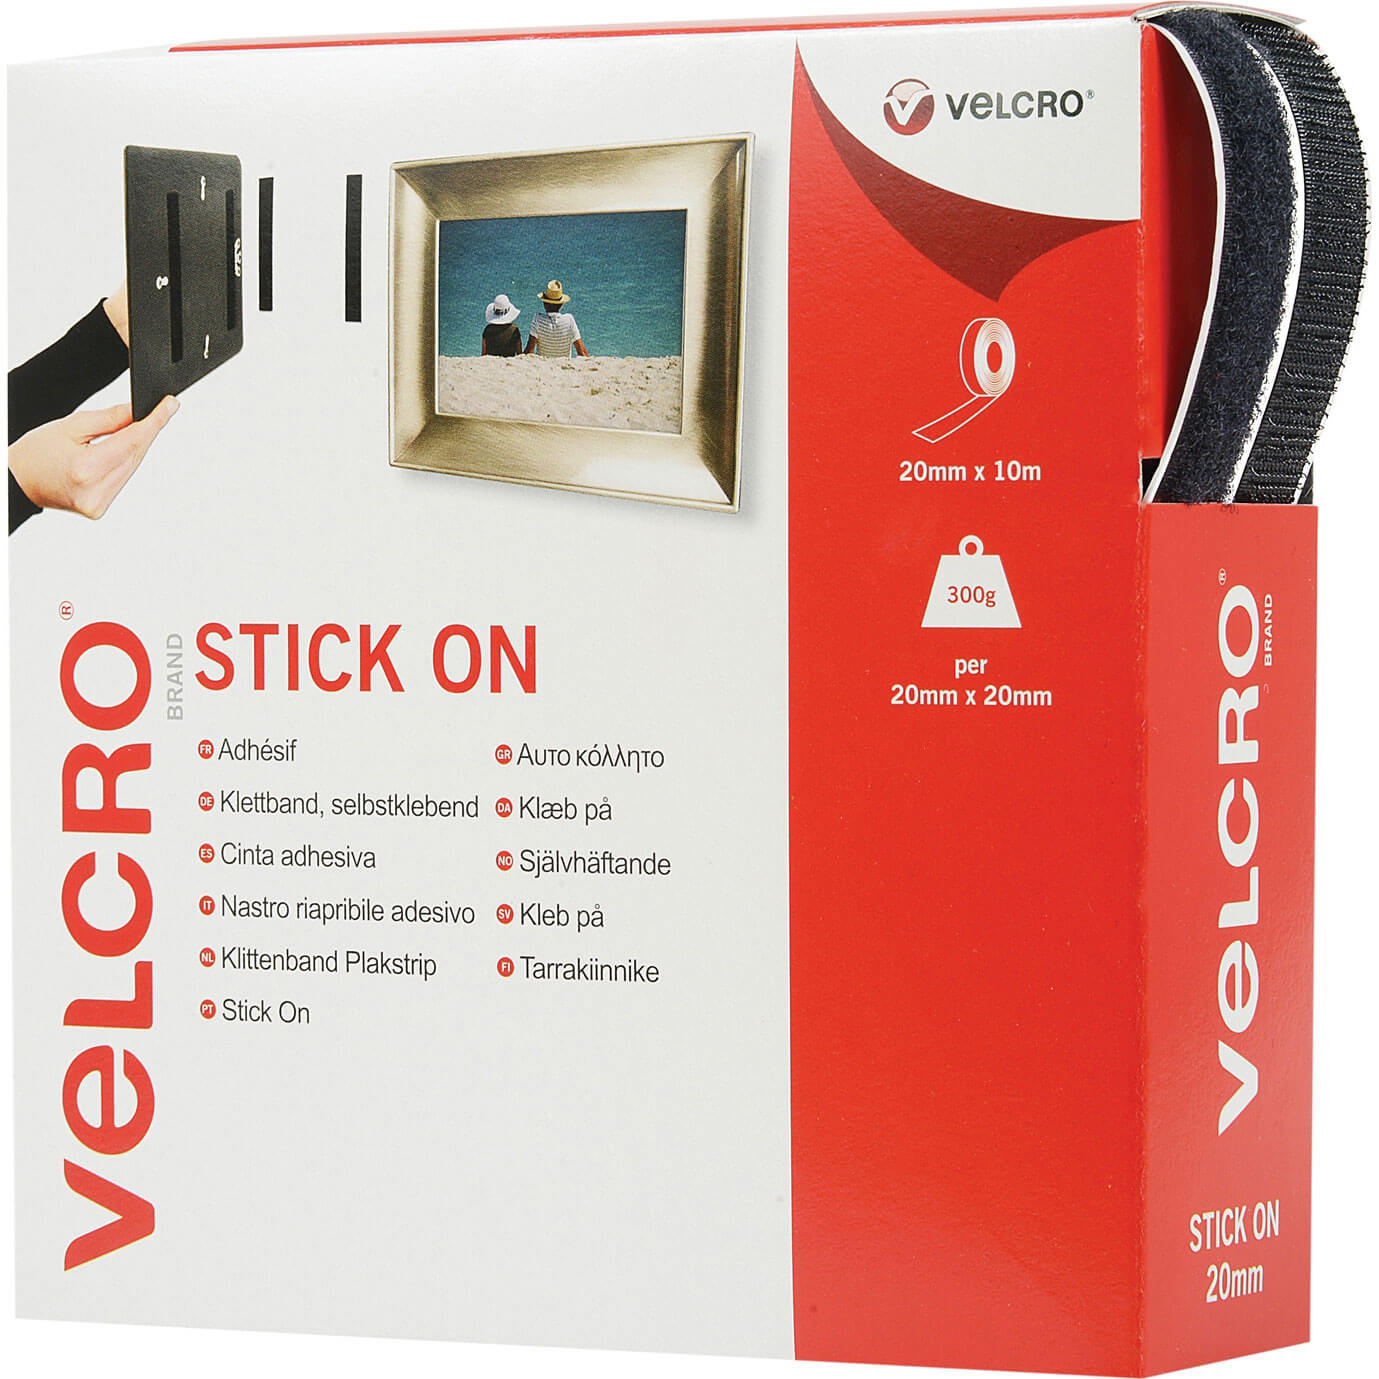 Image of Velcro Stick On Tape Black 20mm 10m Pack of 1